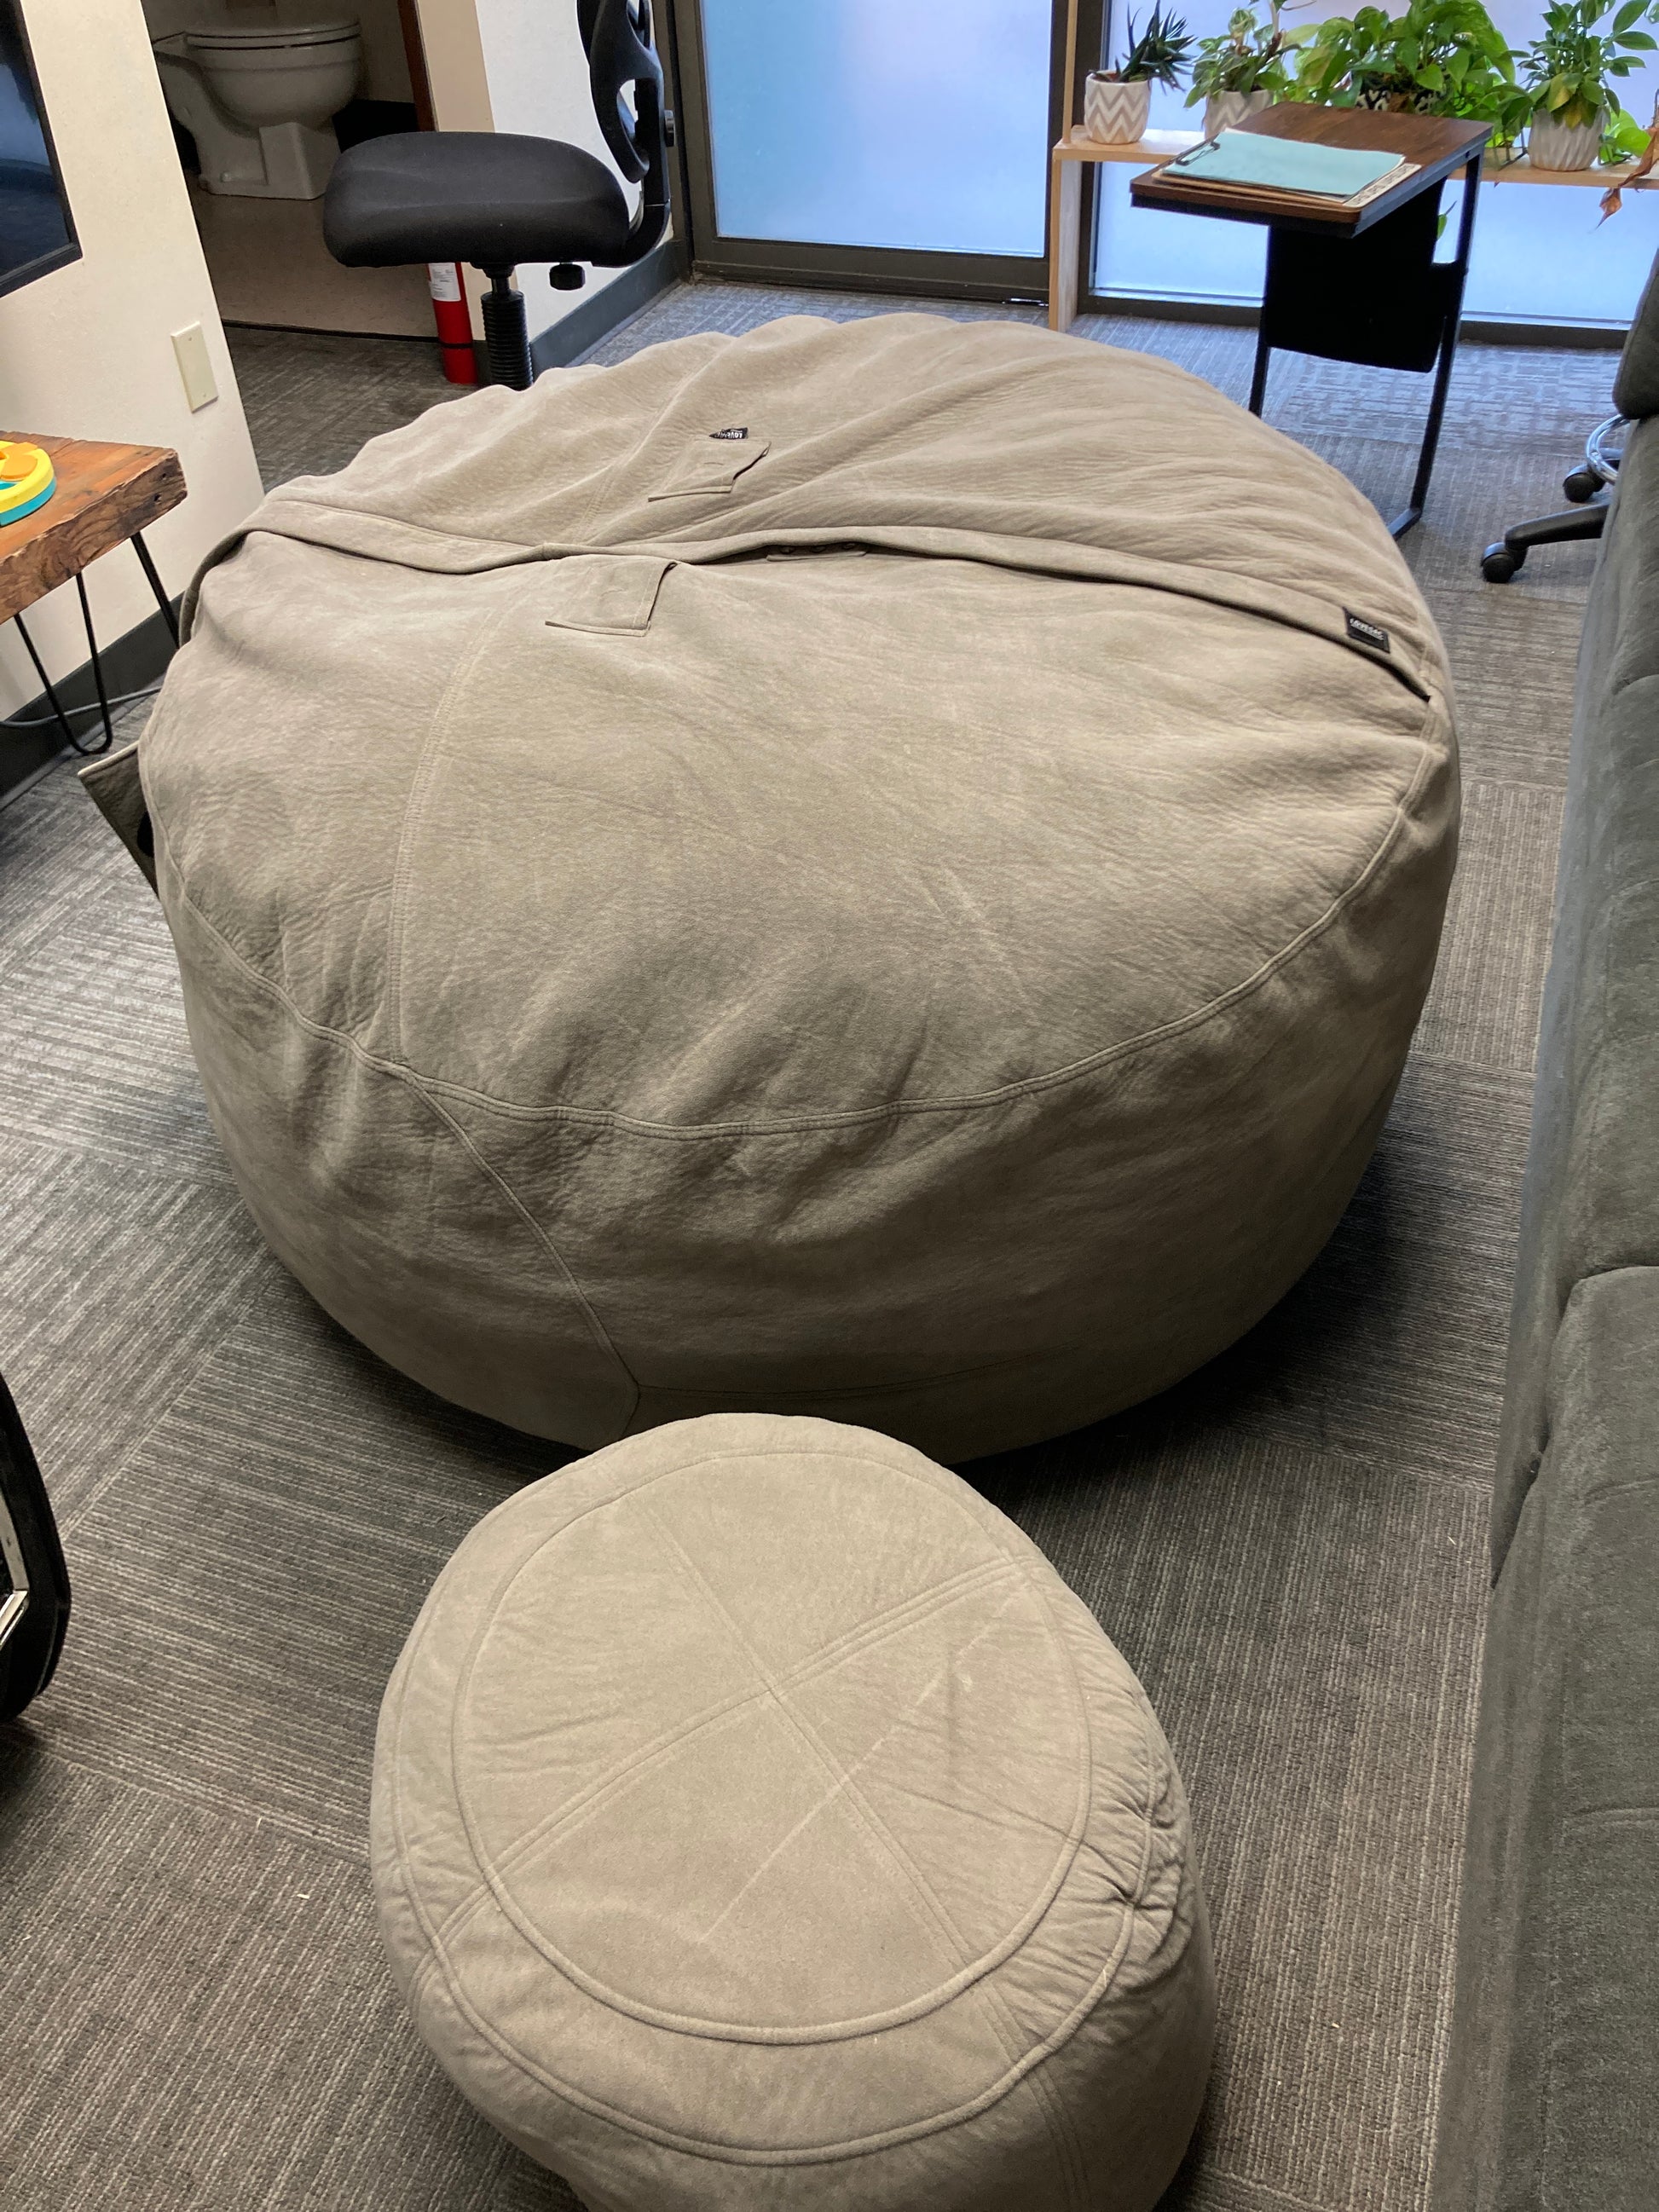 Lovesac - Citysac with Ottoman - Retail $499 Default Title